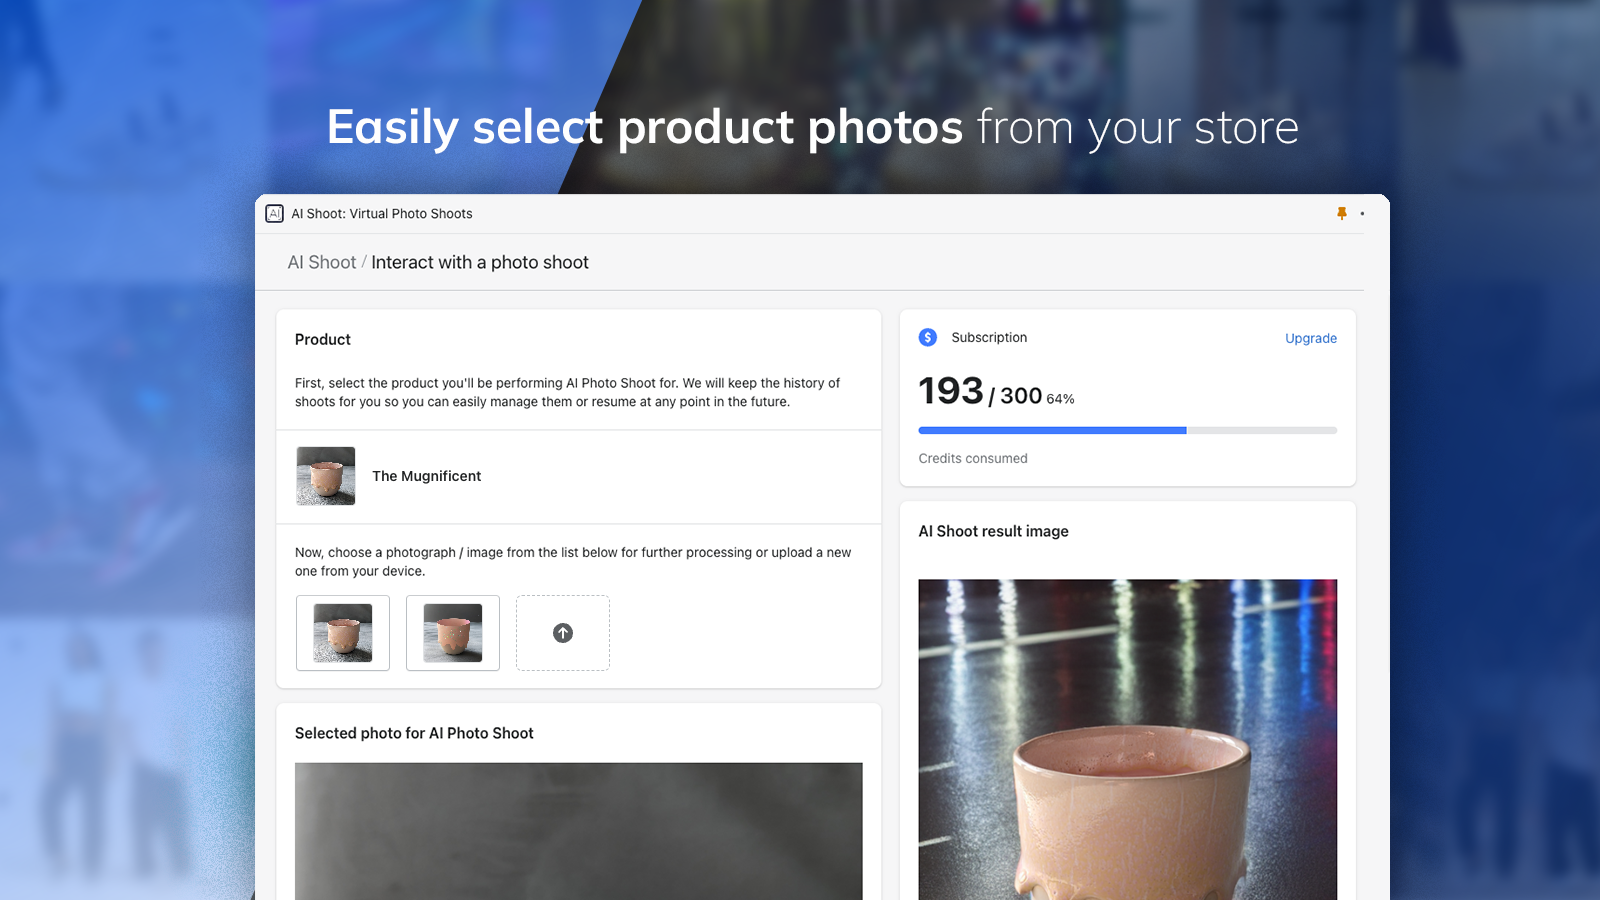 Easily select product photos from your store